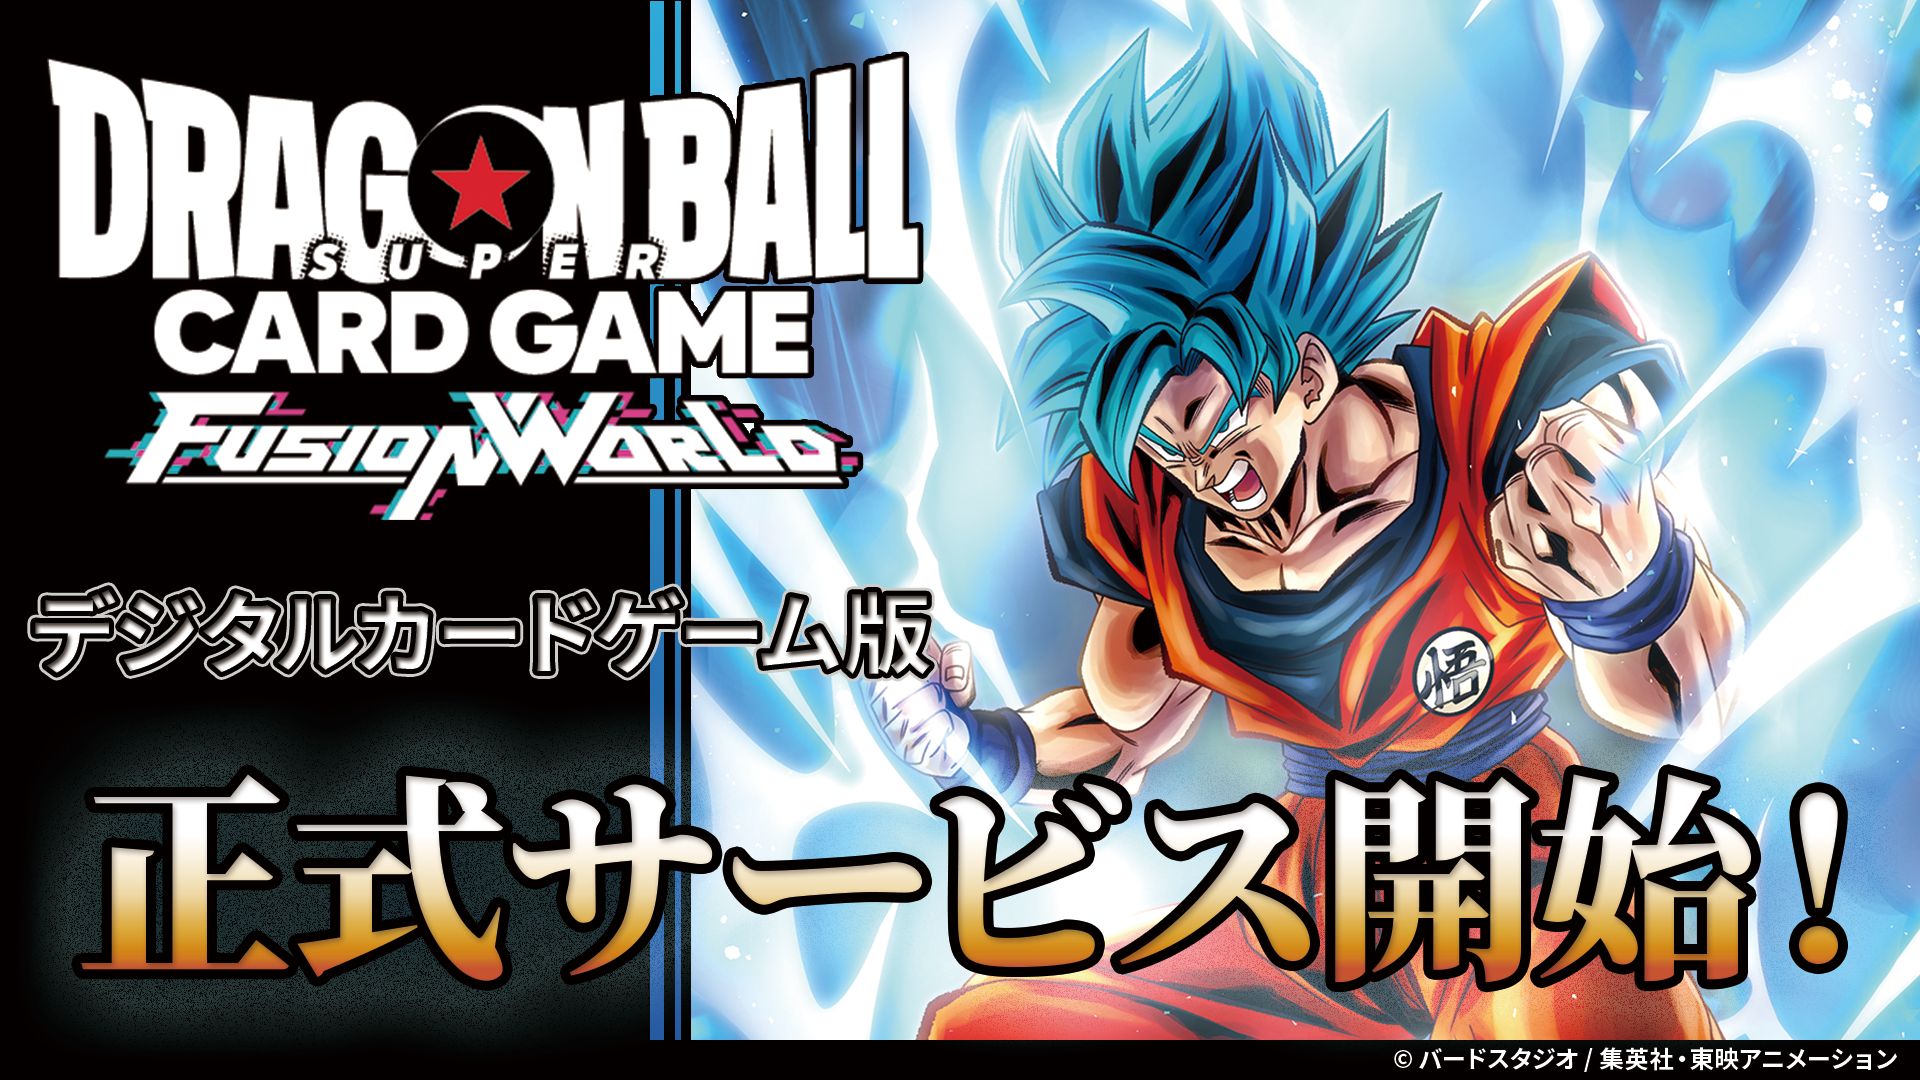 Digital Version of DRAGON BALL SUPER CARD GAME Fusion World Released!